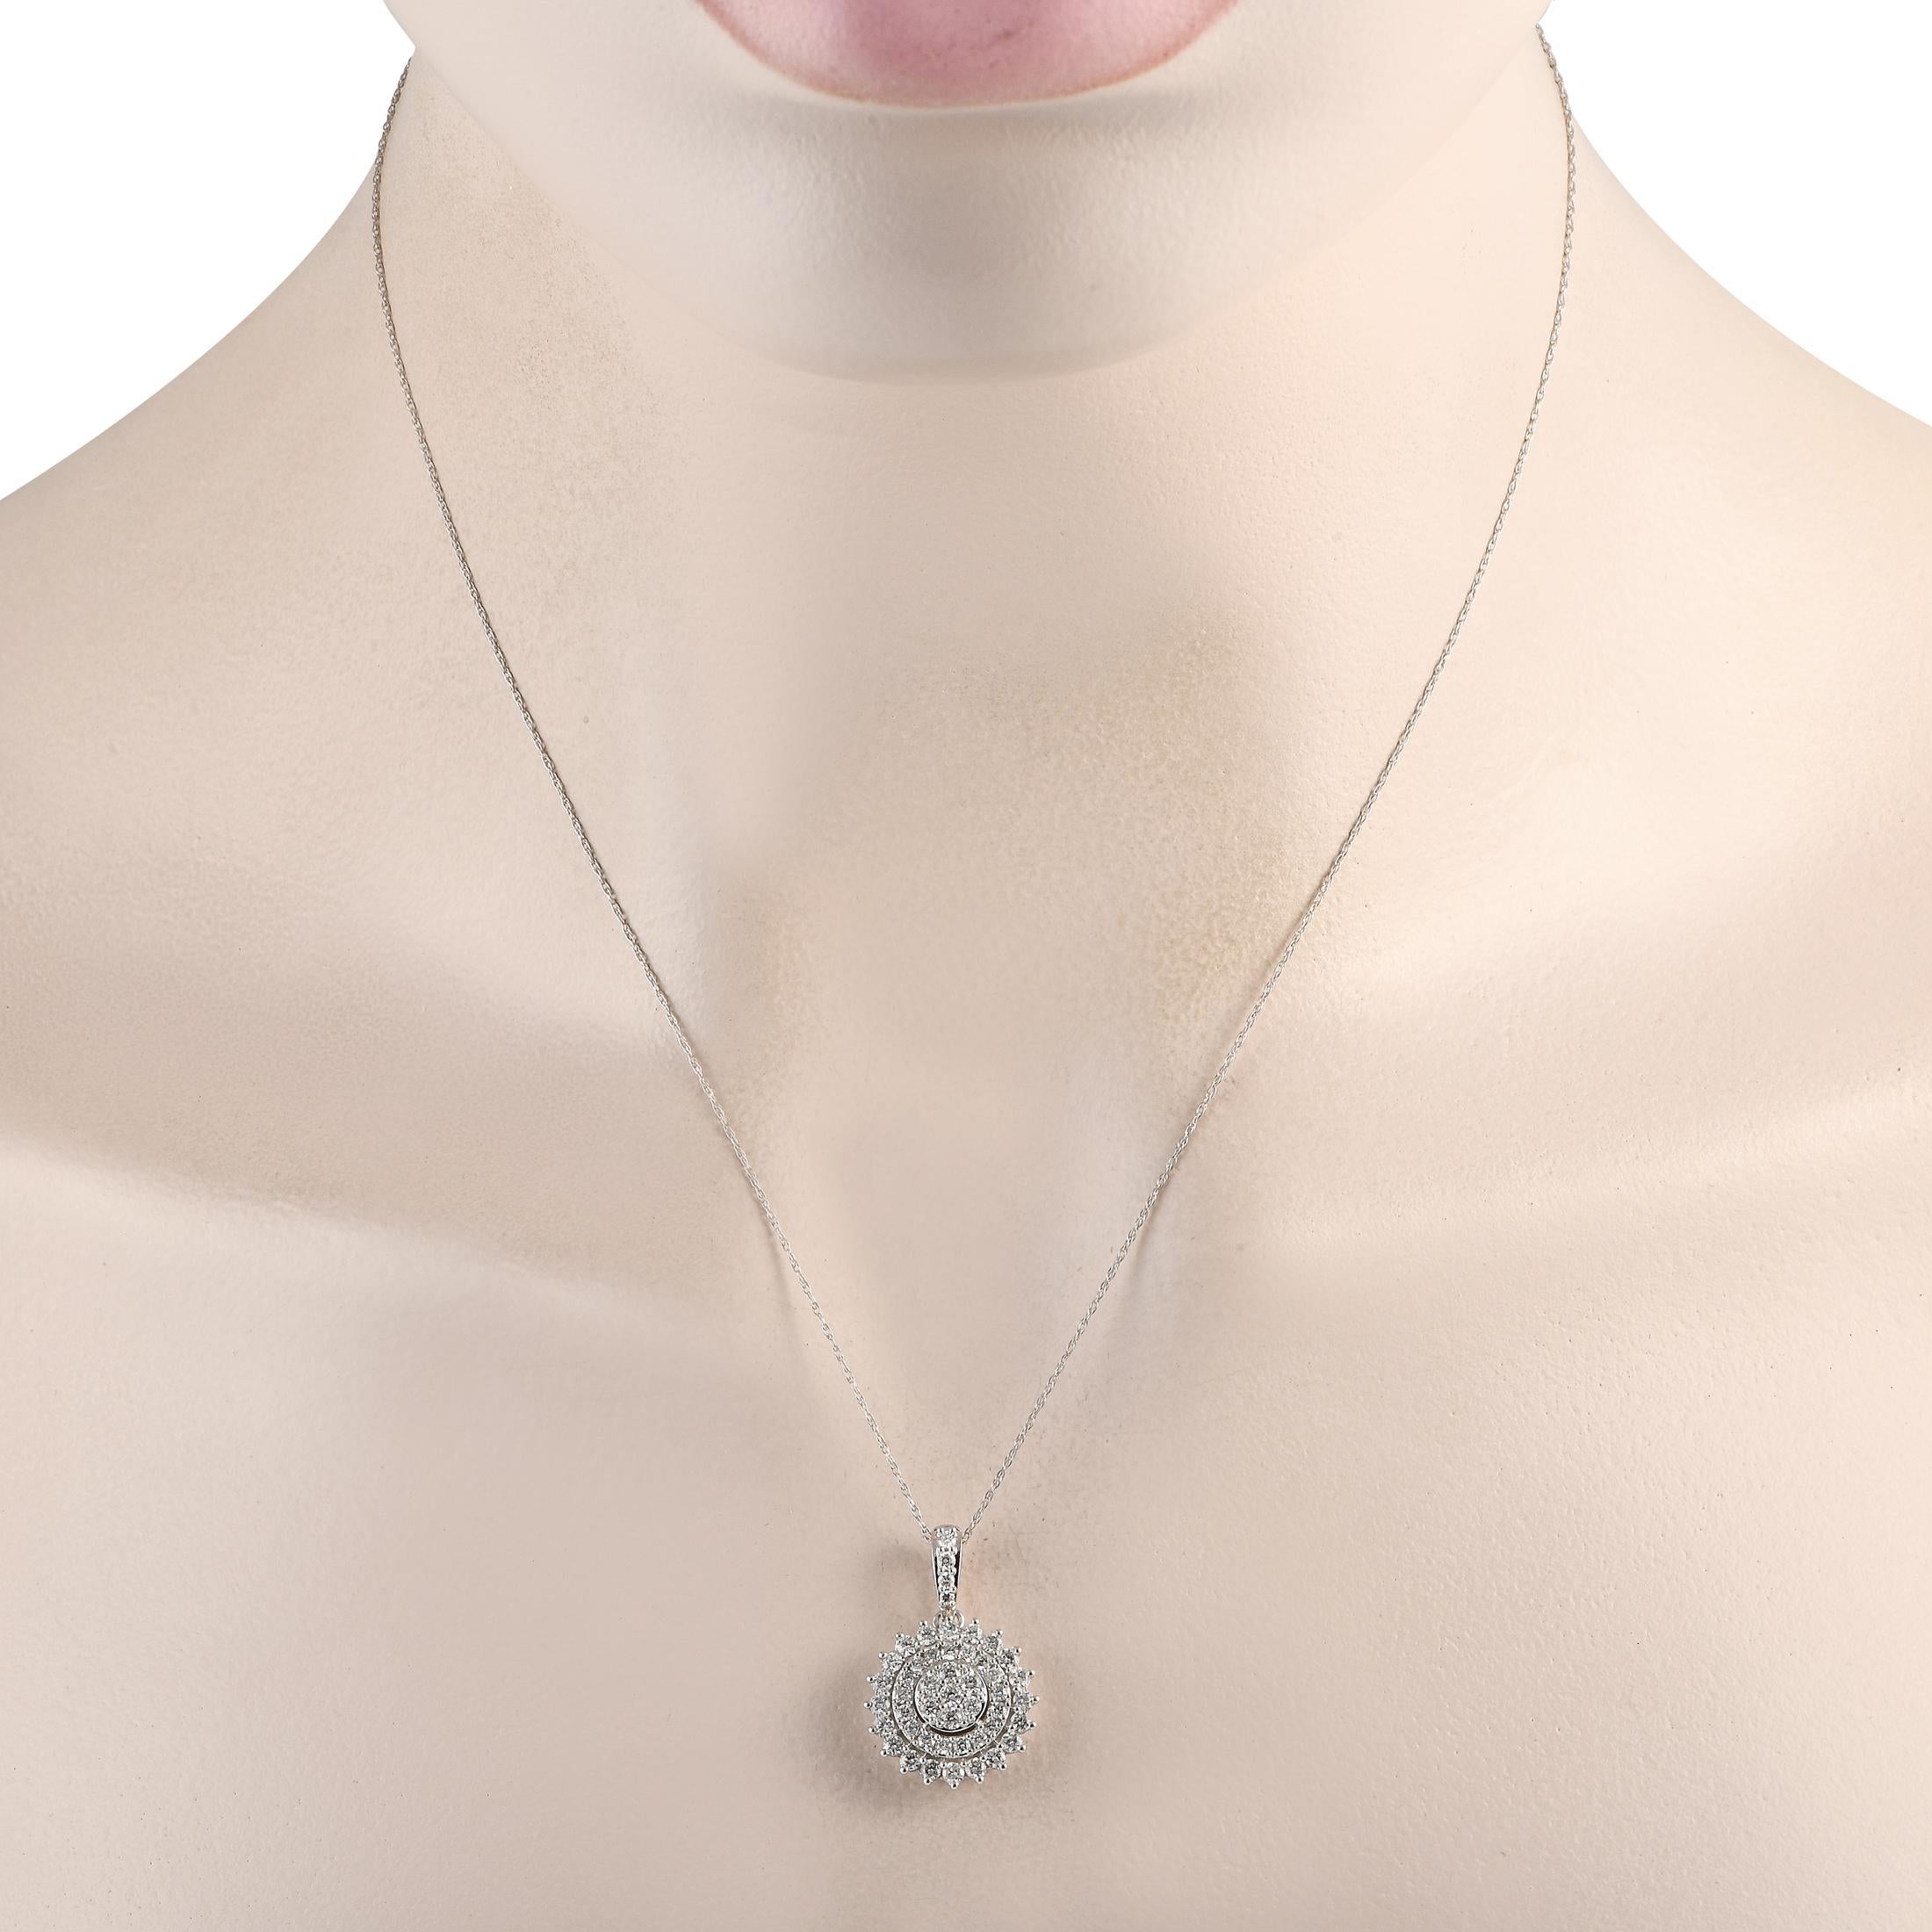 A sunburst pendant measuring 1.0 long by 0.65 wide makes a statement on this impressive necklace. Suspended from an 18 chain, the 14K White Gold pendant shines to life thanks to Diamonds totaling 1.0 carats.This jewelry piece is offered in brand new